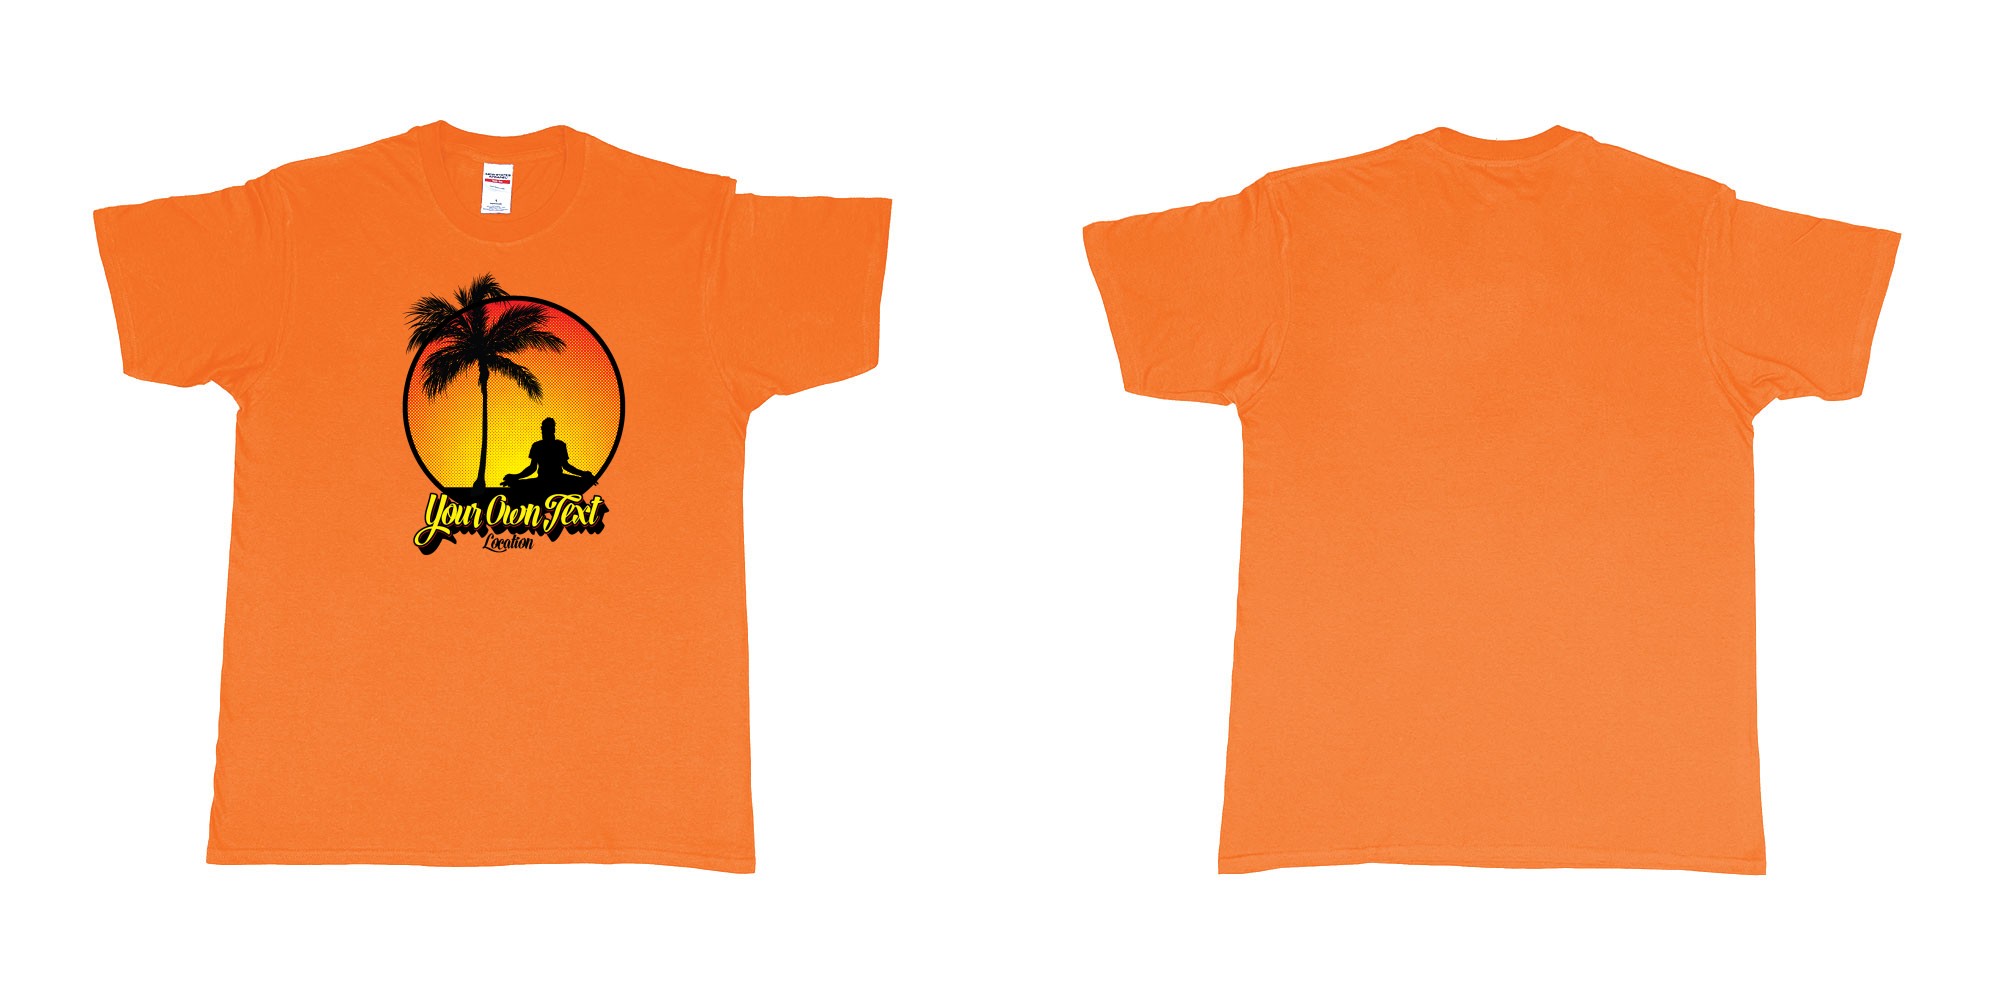 Custom tshirt design yoga palmtree sunset halftone your own text location screen printing bali in fabric color orange choice your own text made in Bali by The Pirate Way